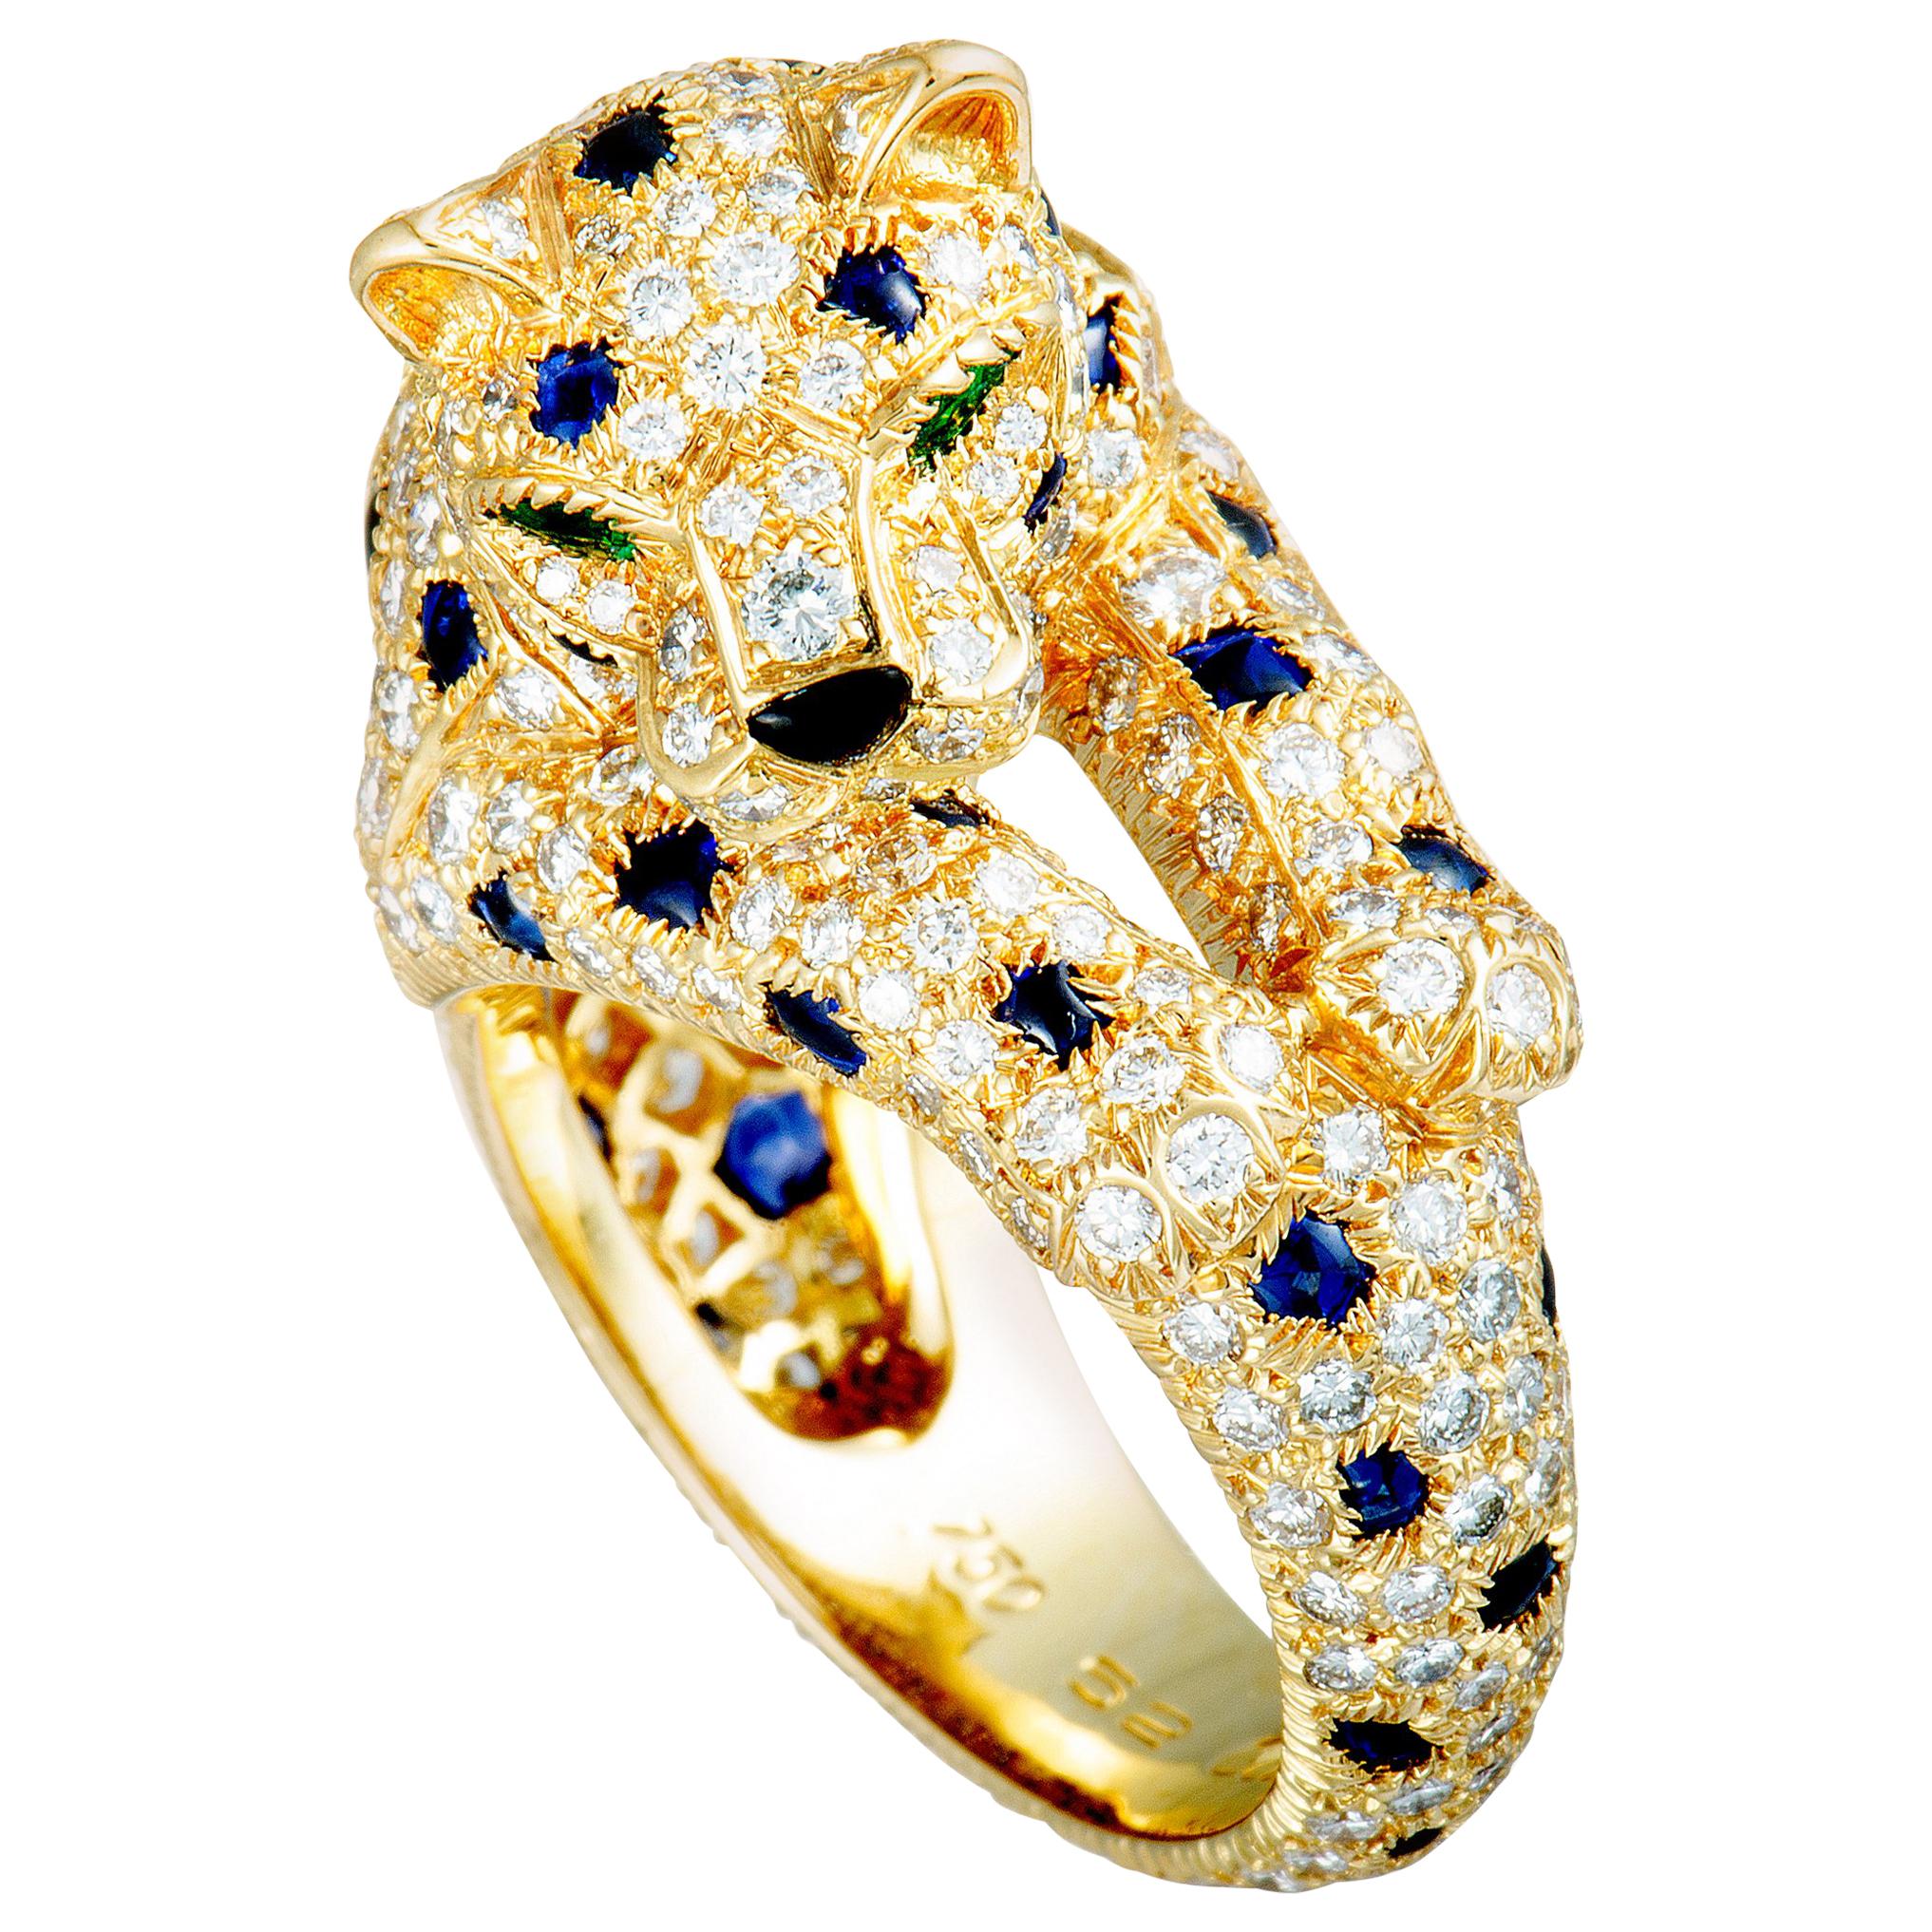 Cartier Panthère Diamond Pave, Sapphires, Emeralds and Onyx Yellow Gold Ring